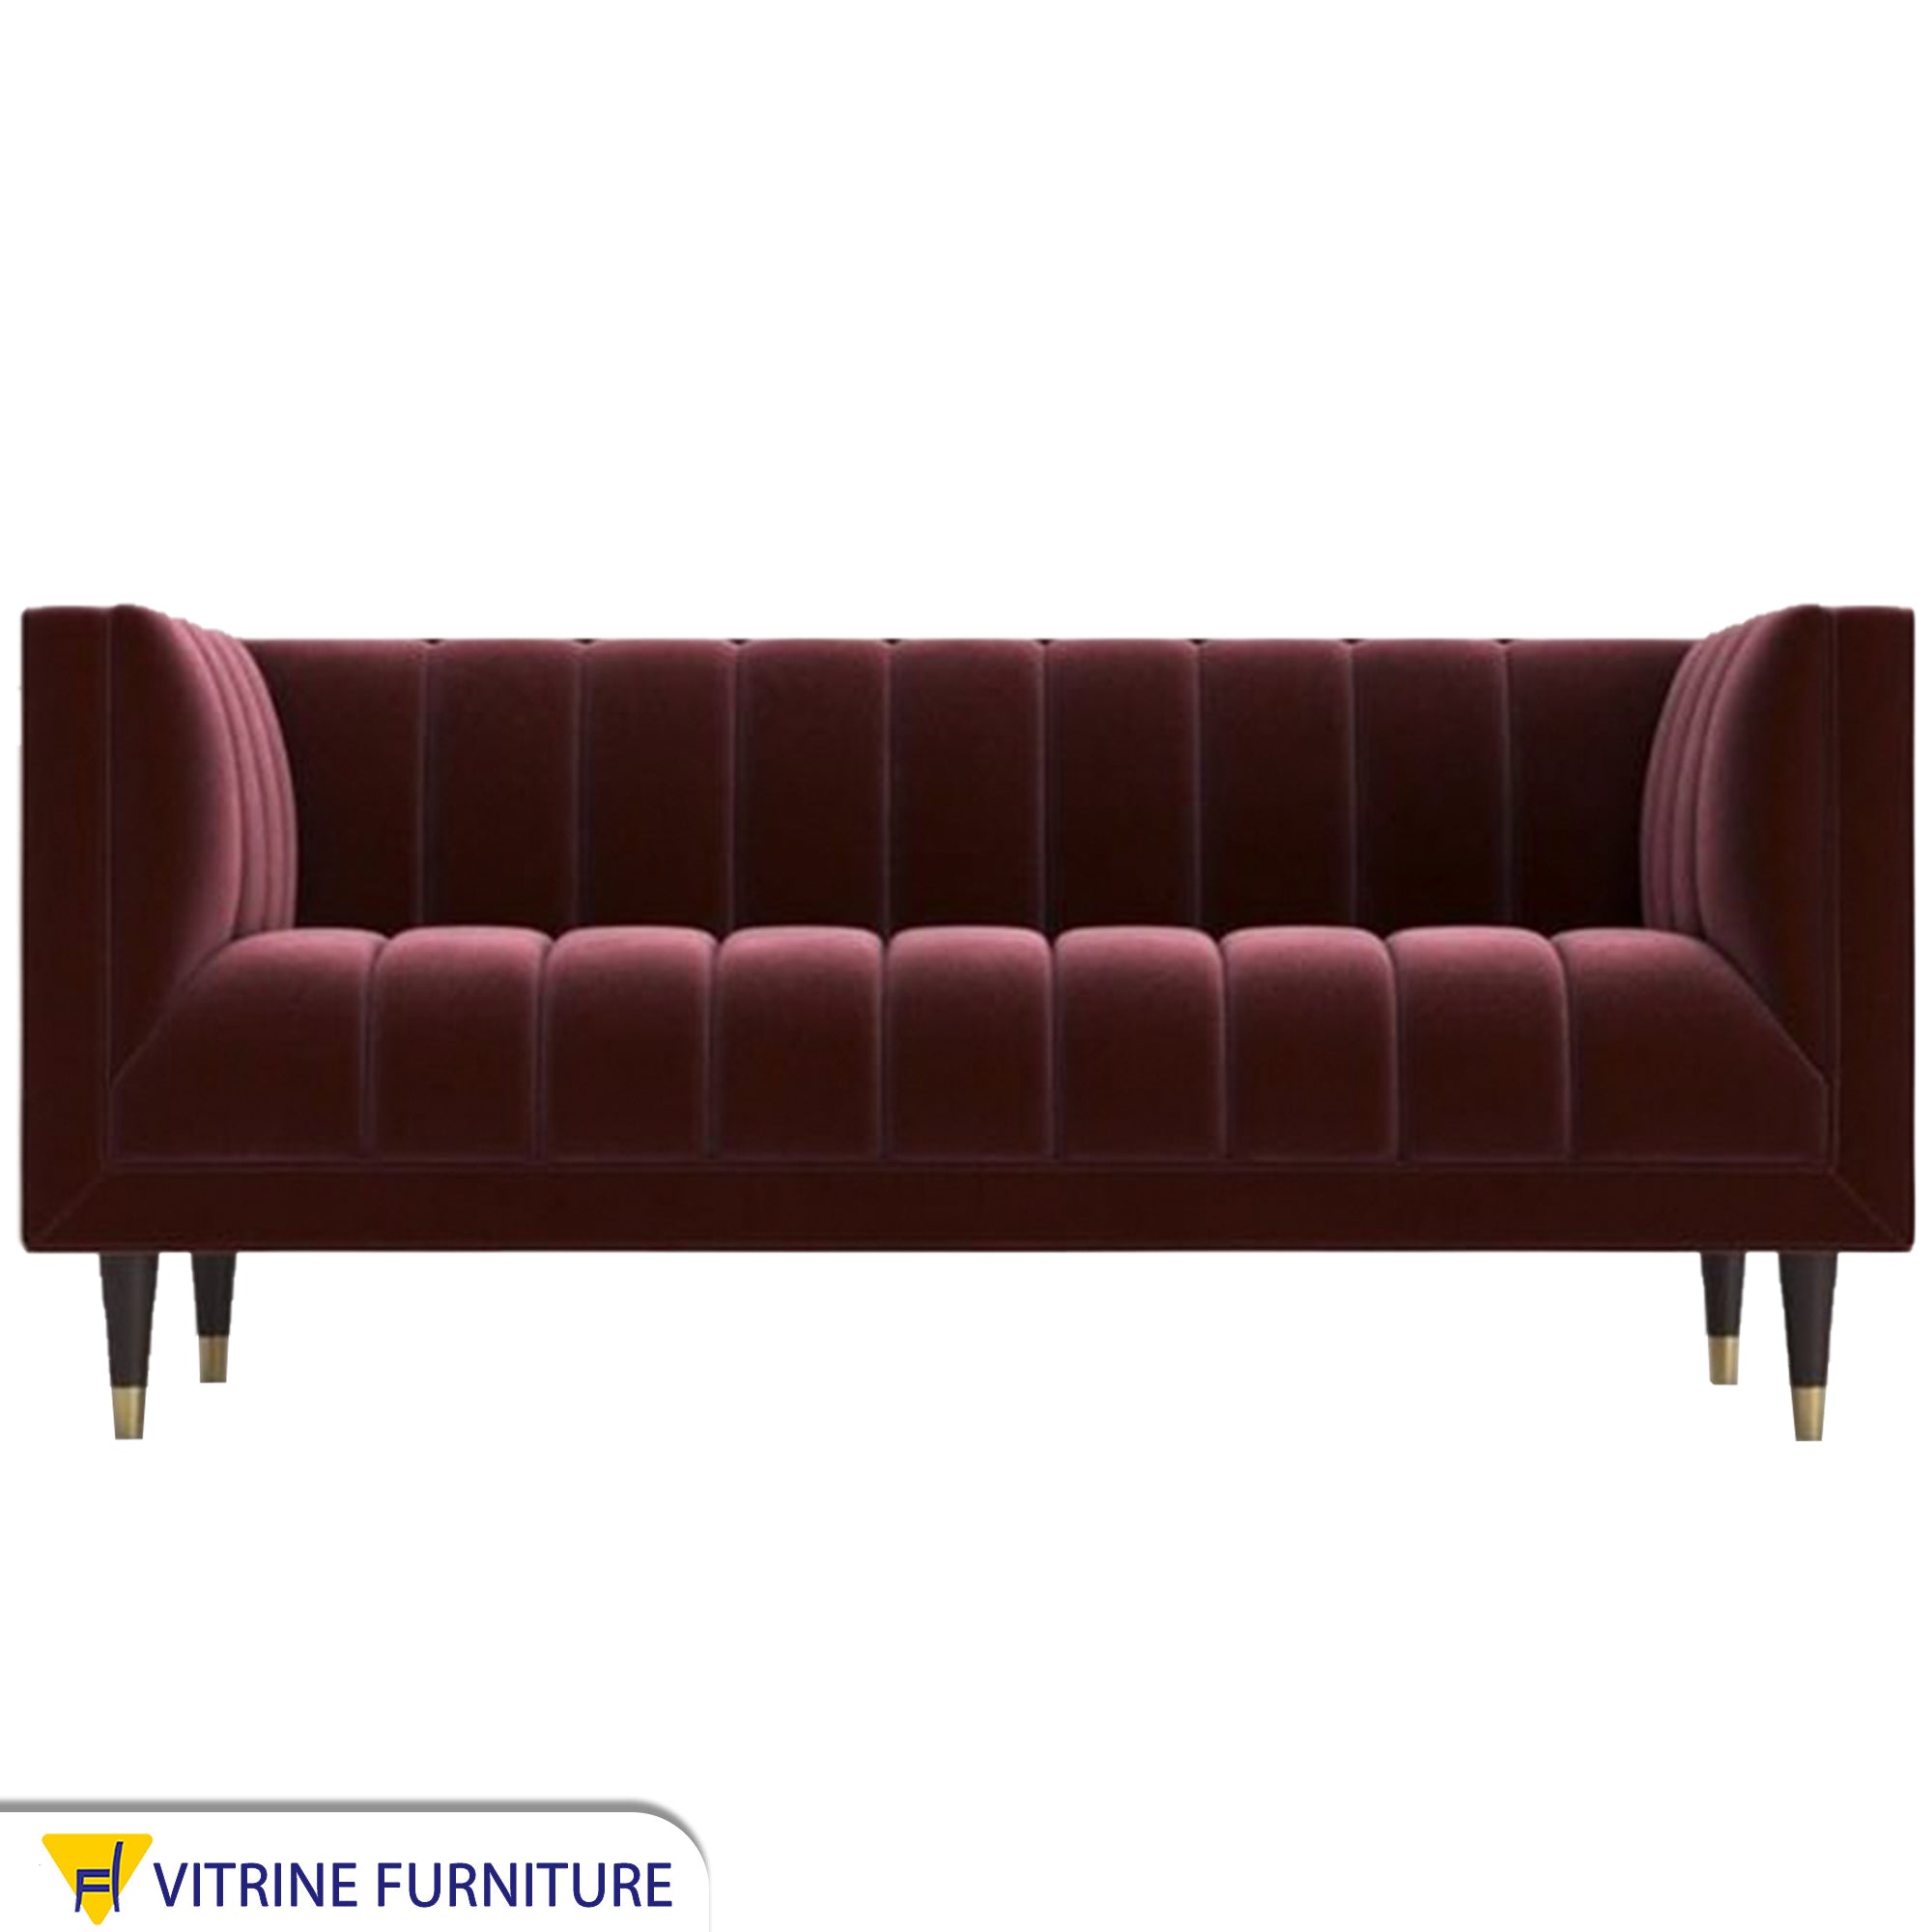 A sofa in a burgundy color with recessed lines on the back and the base